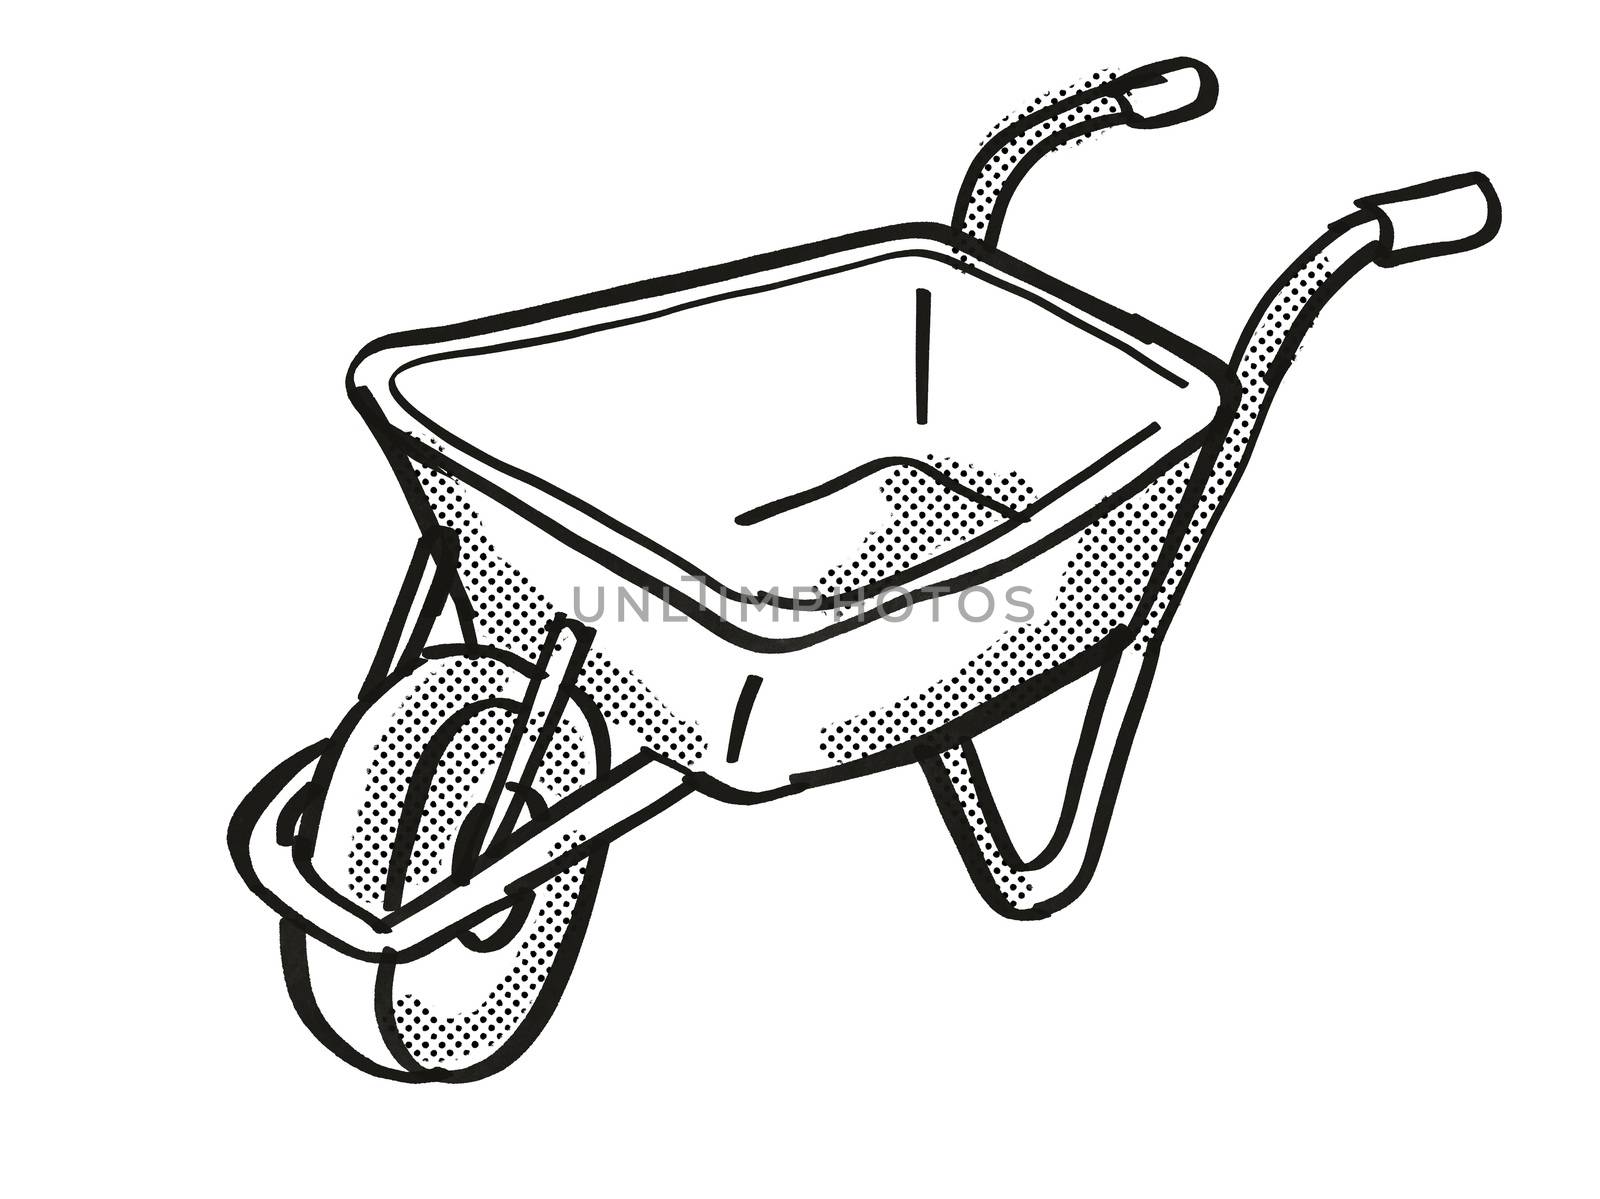 Retro cartoon style drawing of a Wheel Borrow or Wheelborrow Wagon,  a garden or construction tool or equipment  on isolated white background done in black and white.